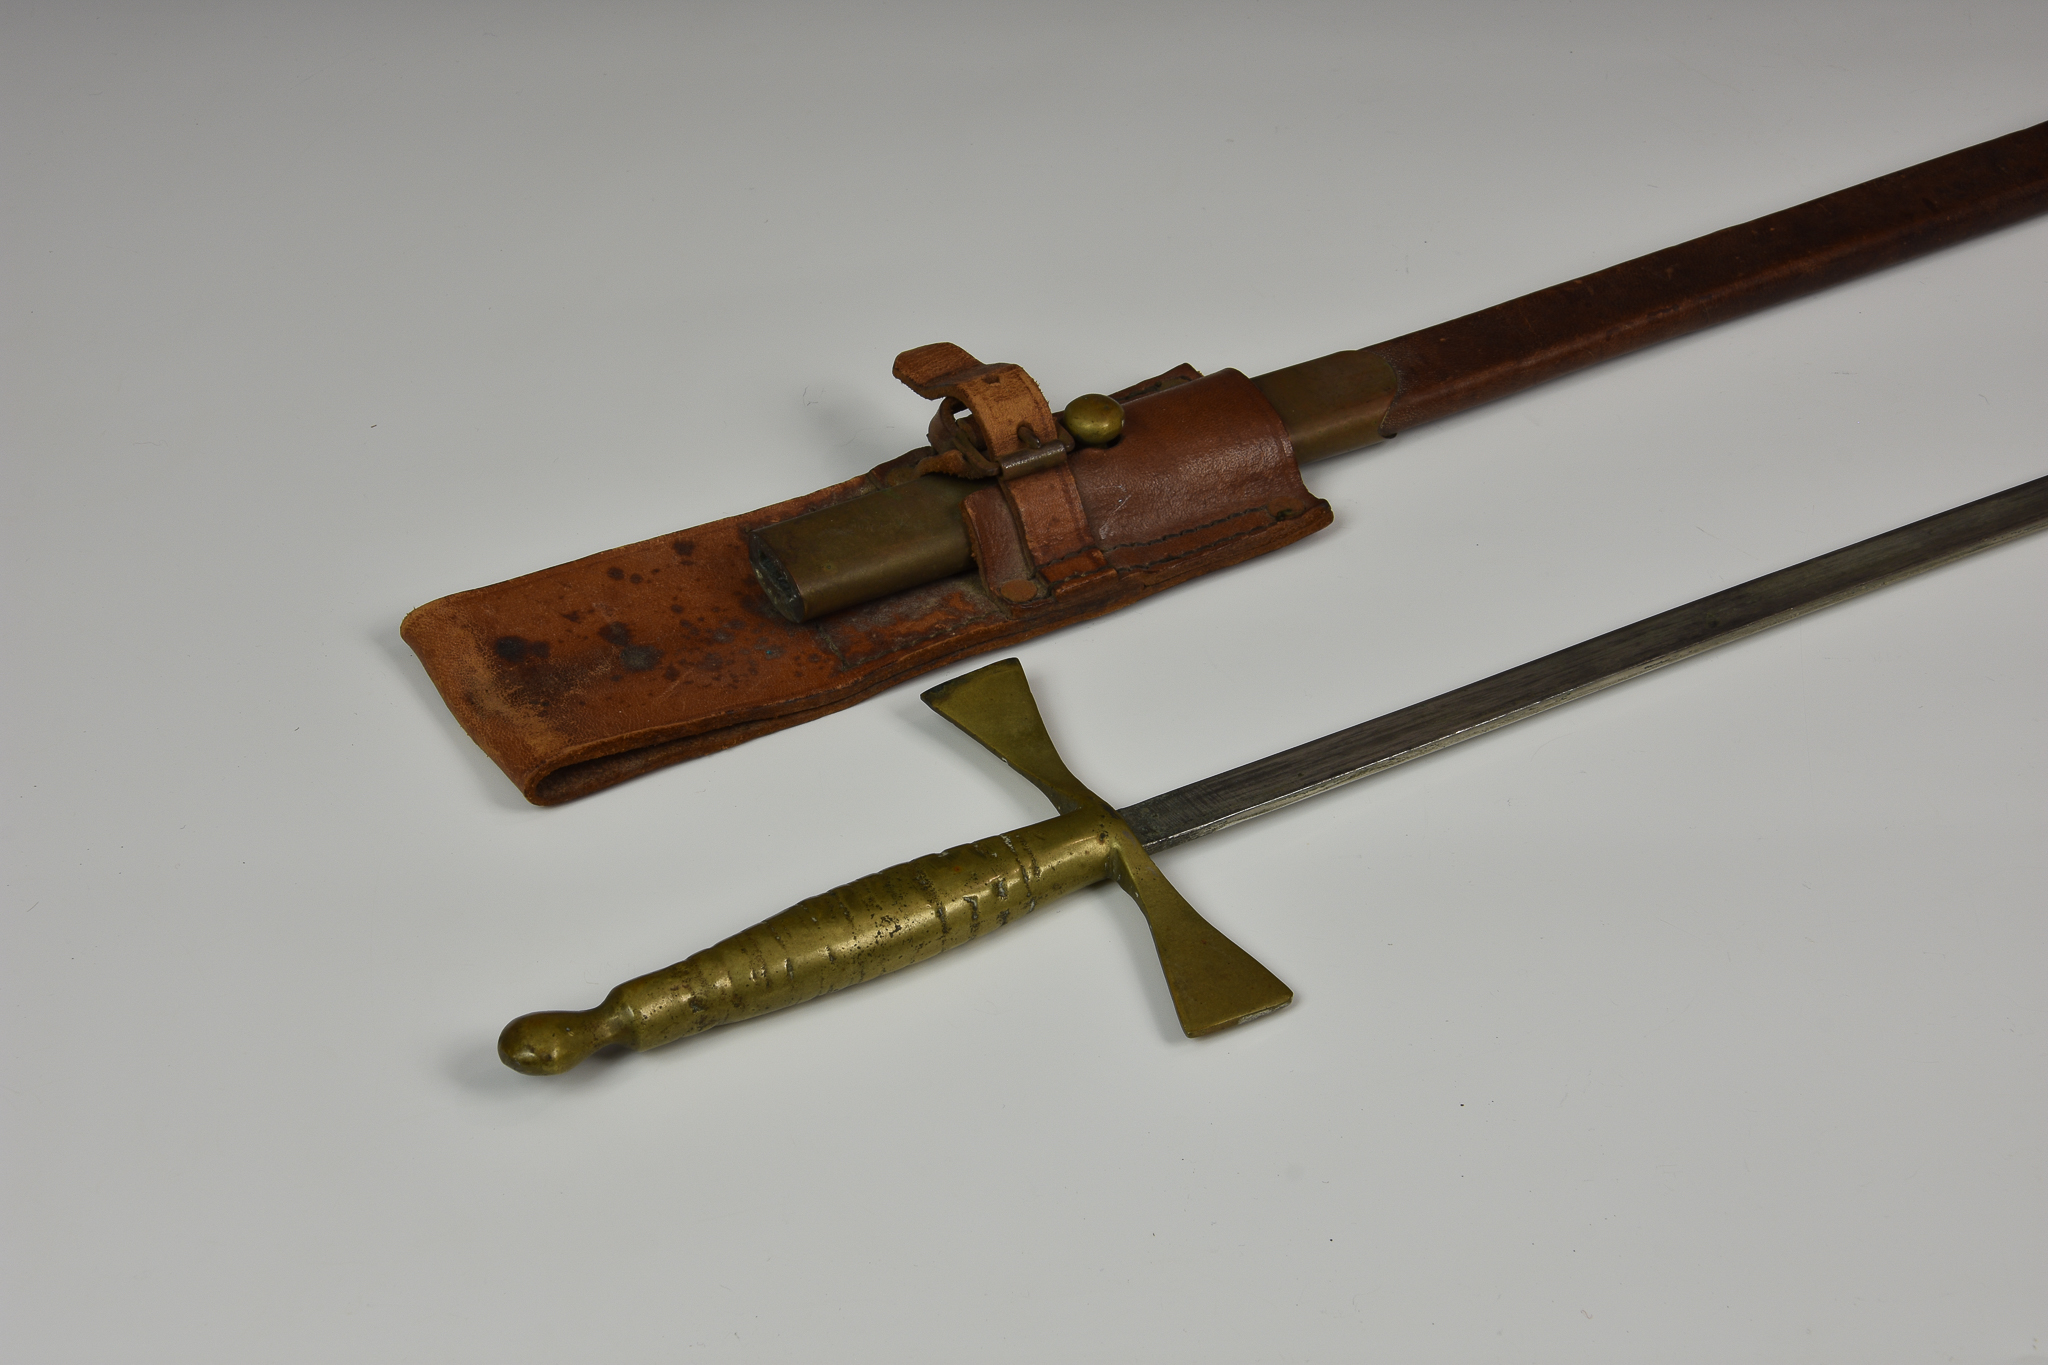 An unmarked Court Sword, brass handle, 27in. blade, brown leather scabbard.